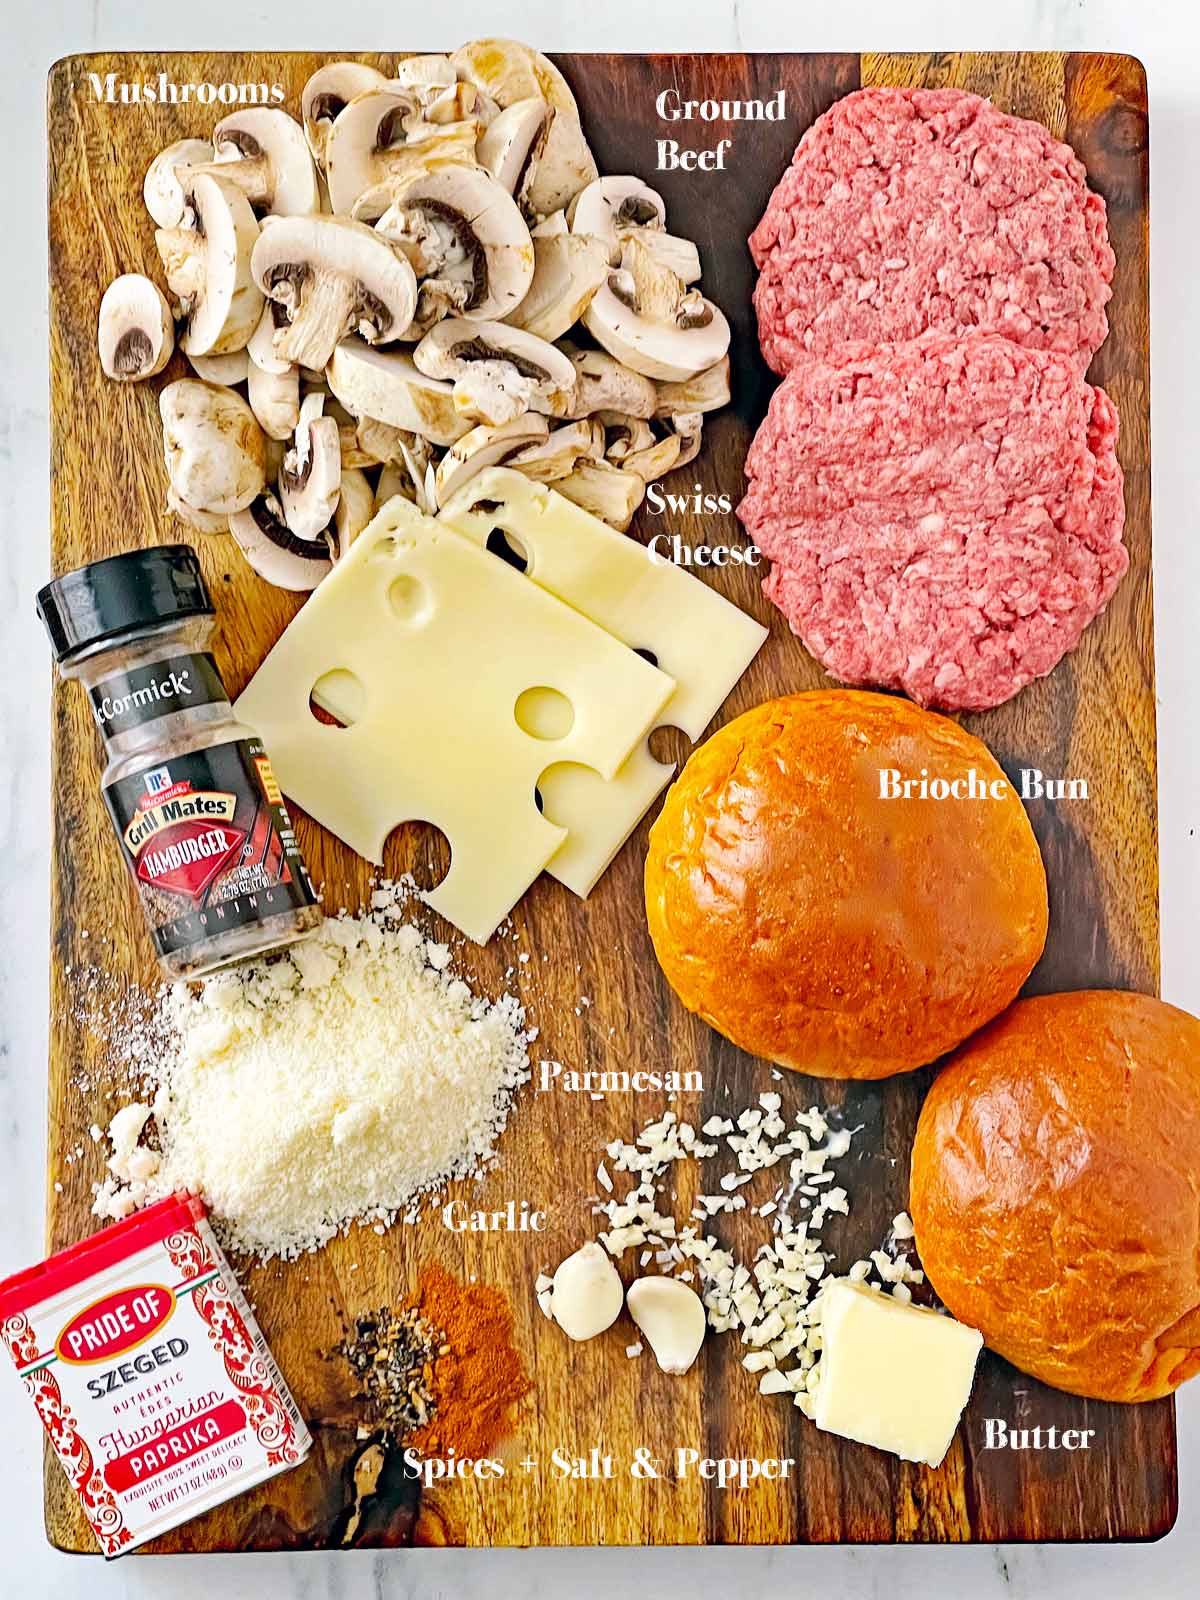 Cutting board with all the ingredients for Red Robin Mushroom Swiss Burger Recipe.